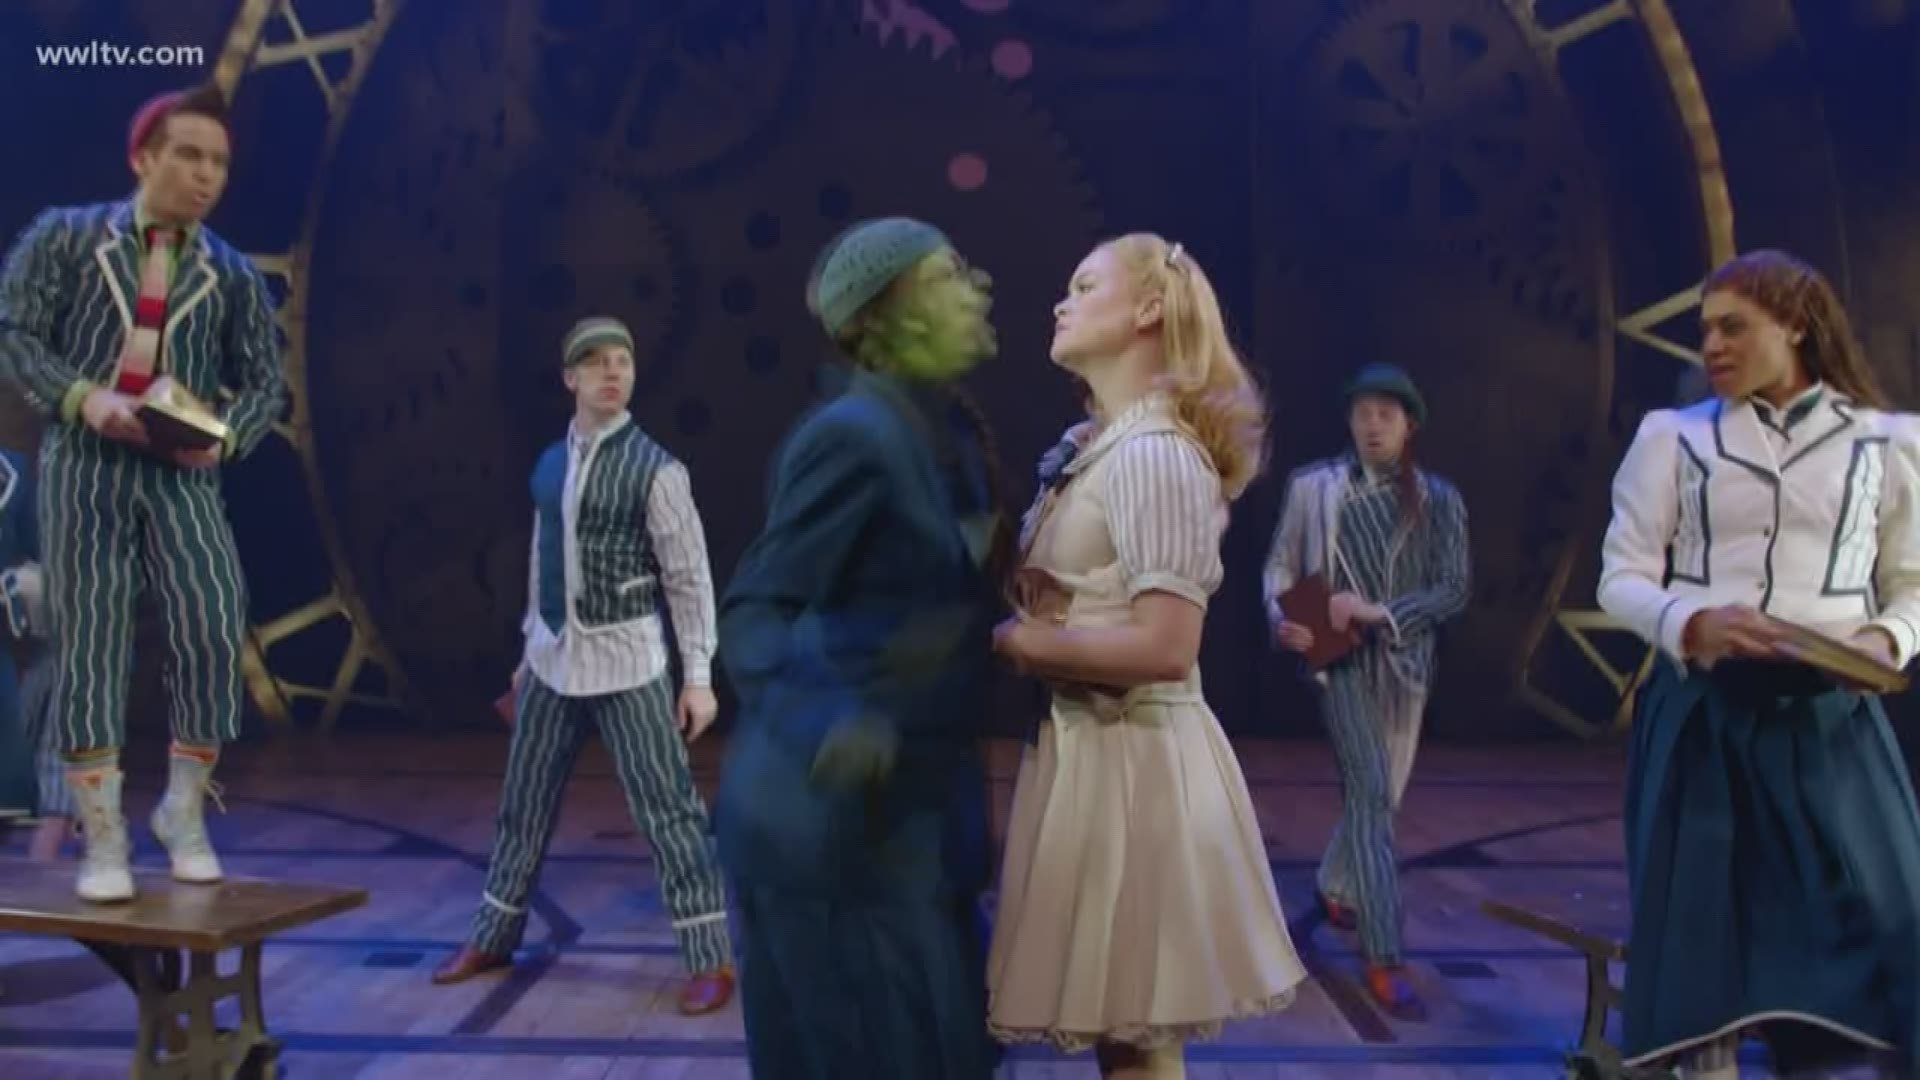 Sheba sits down with the very talented stars of the Broadway show 'Wicked'.